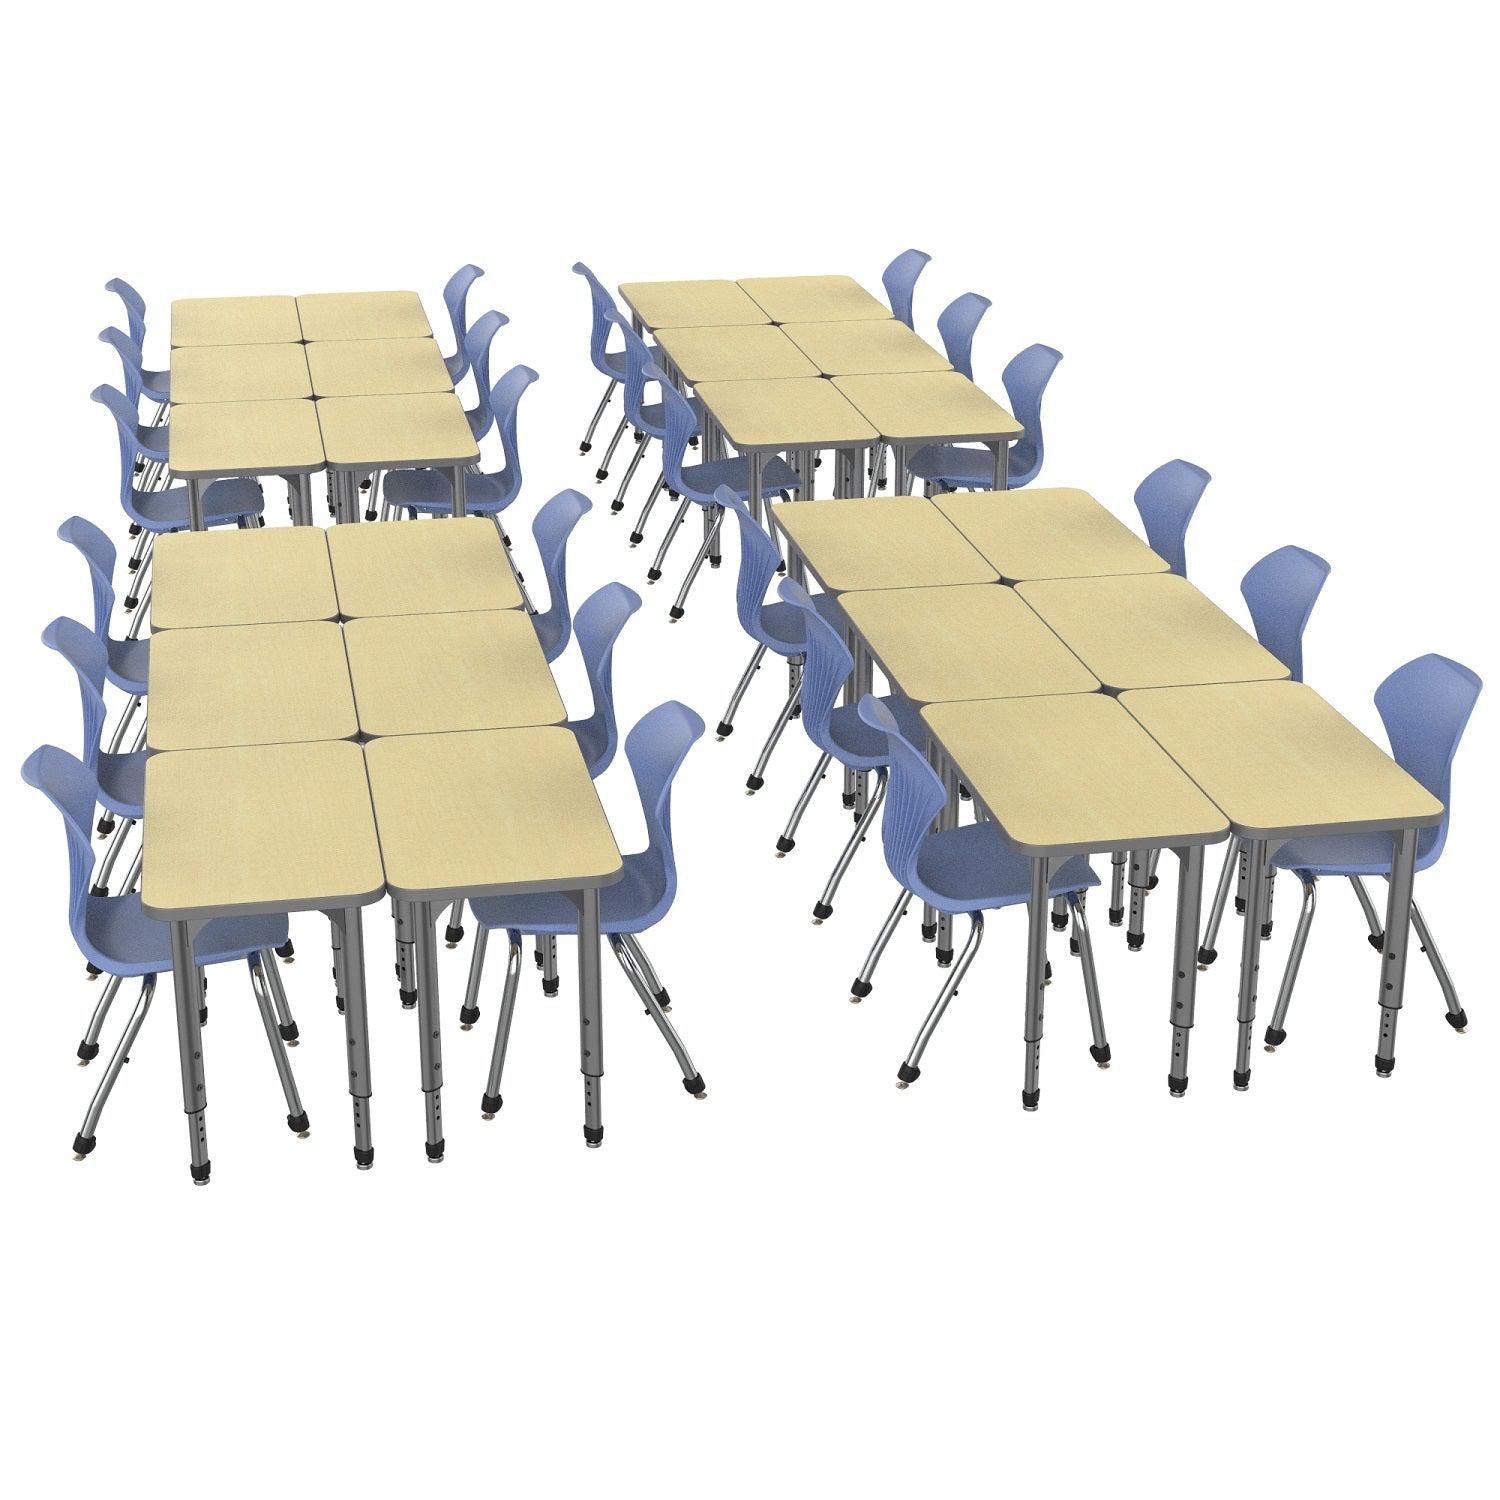 Apex Classroom Desk and Chair Package, 24 Rectangle Collaborative Student Desks, 20" x 36", with 24 Apex Stack Chairs